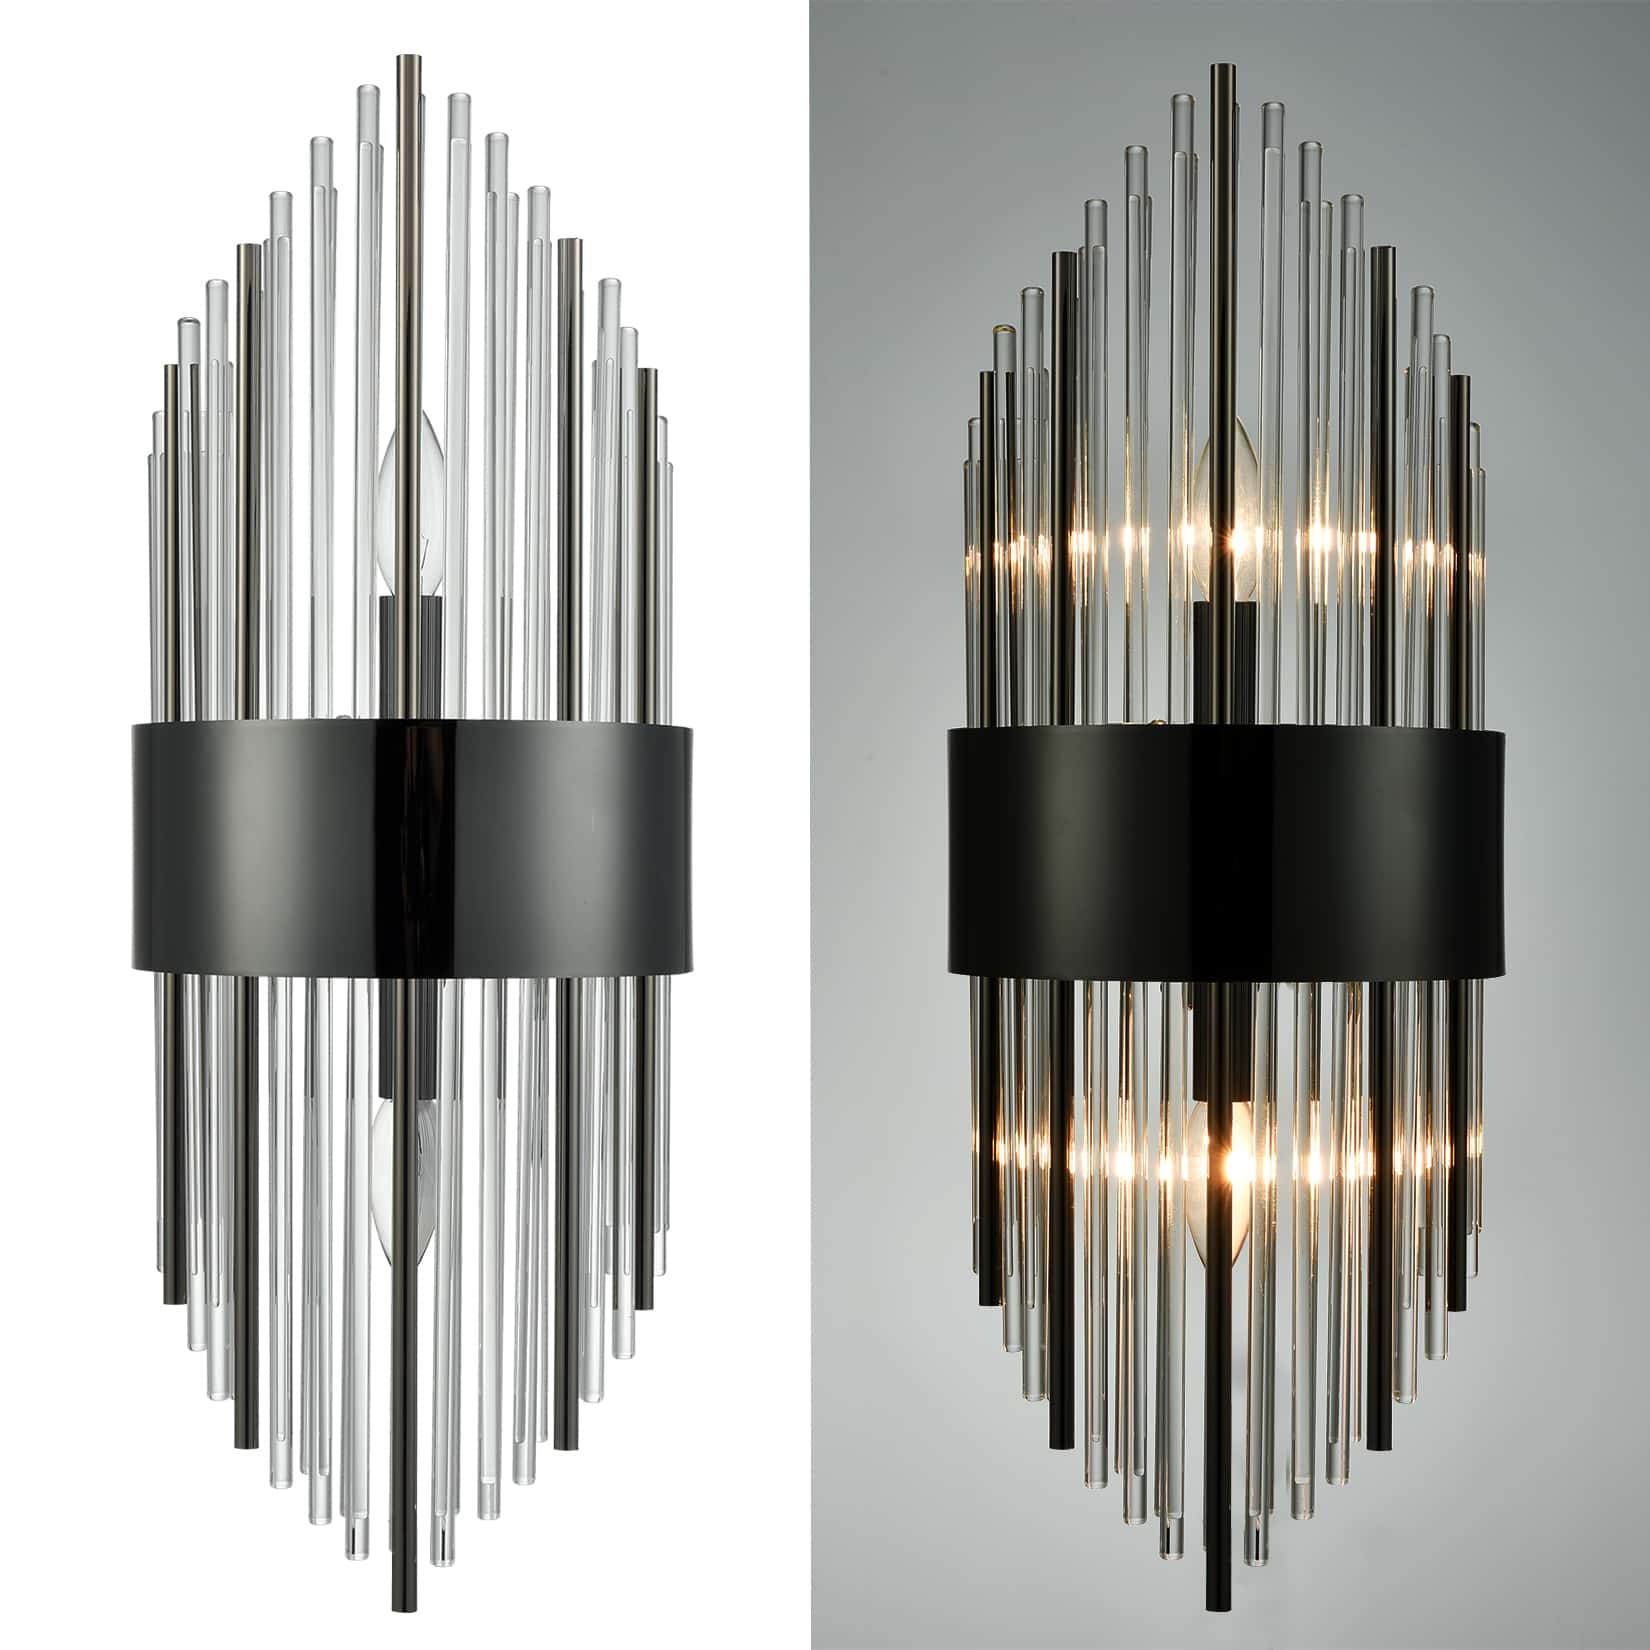 Modern Flute Shape Glass Wall Sconces 2-Pack Wall Sconce Lighting